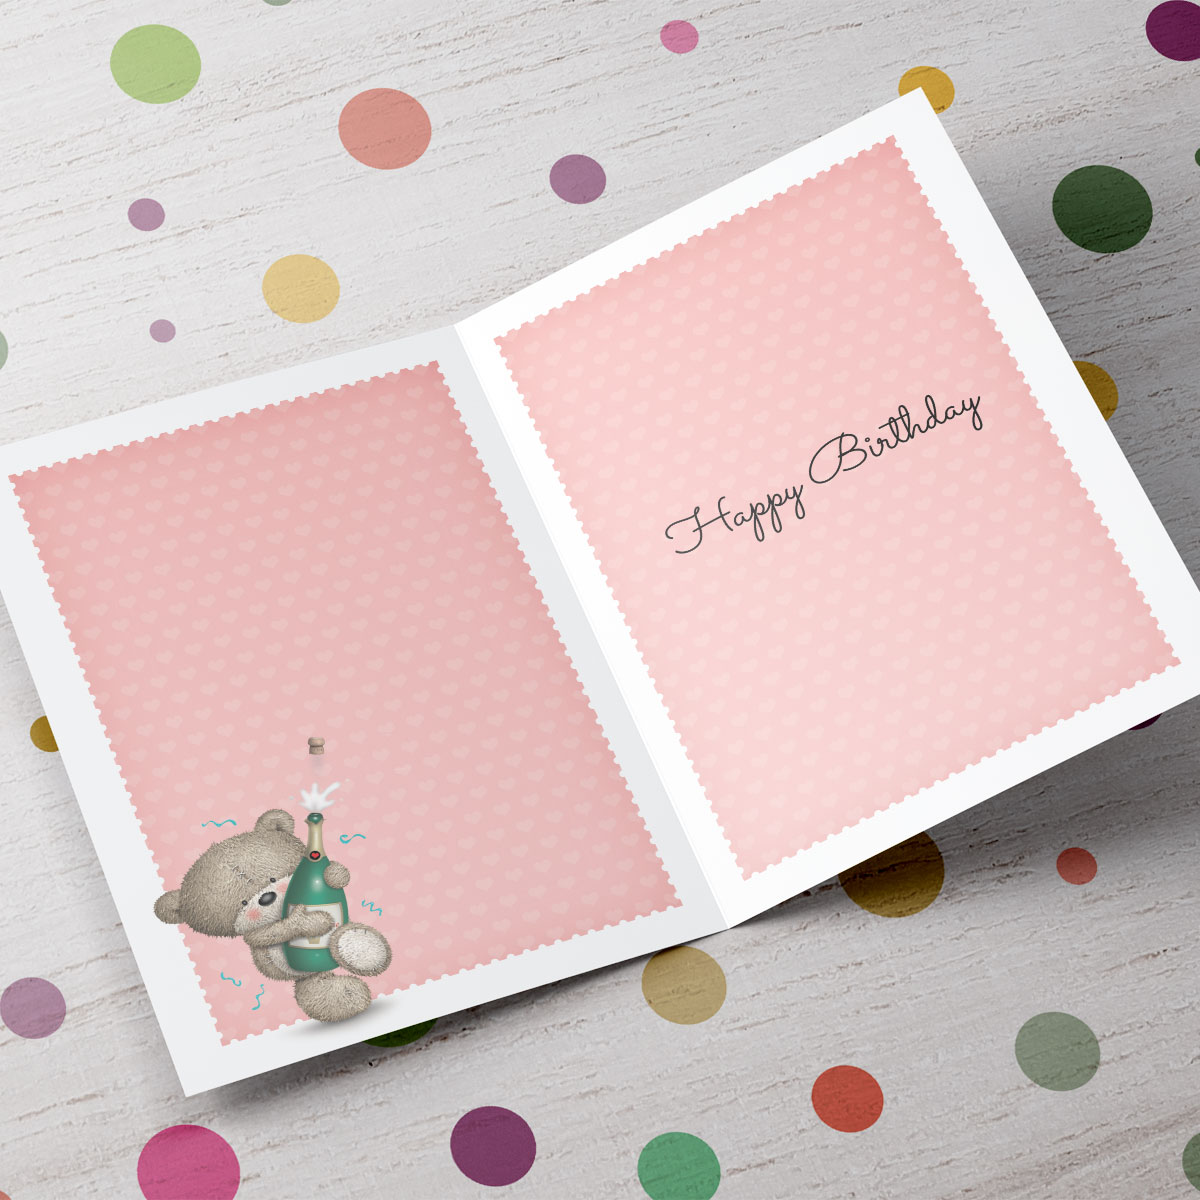 Personalised Hugs Birthday Card - Time To Celebrate